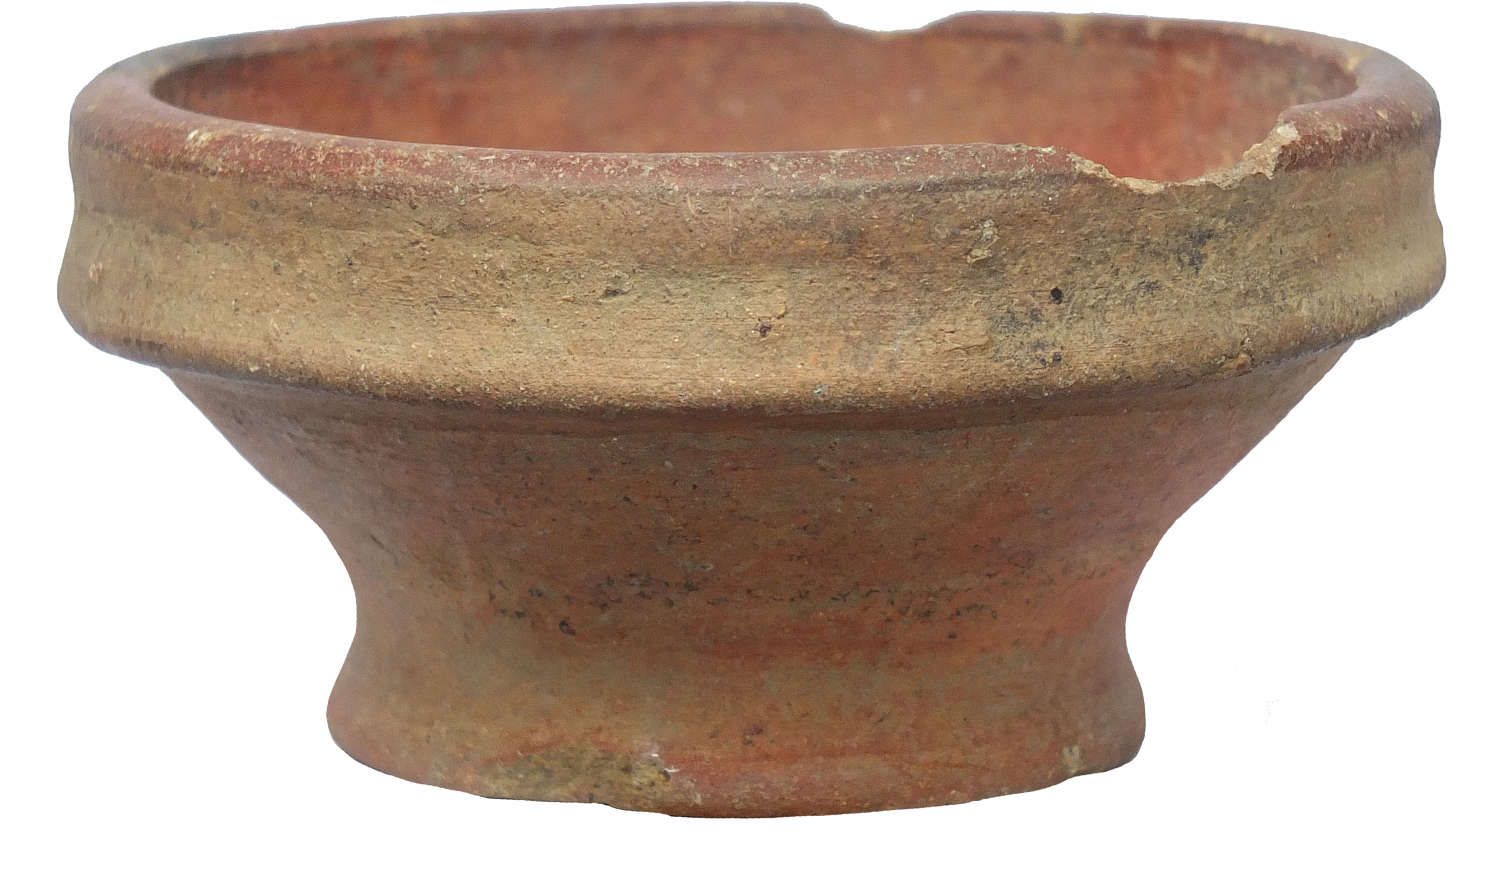 A small Costa Rican red-slipped carinated bowl, c. 800-1500 A.D.